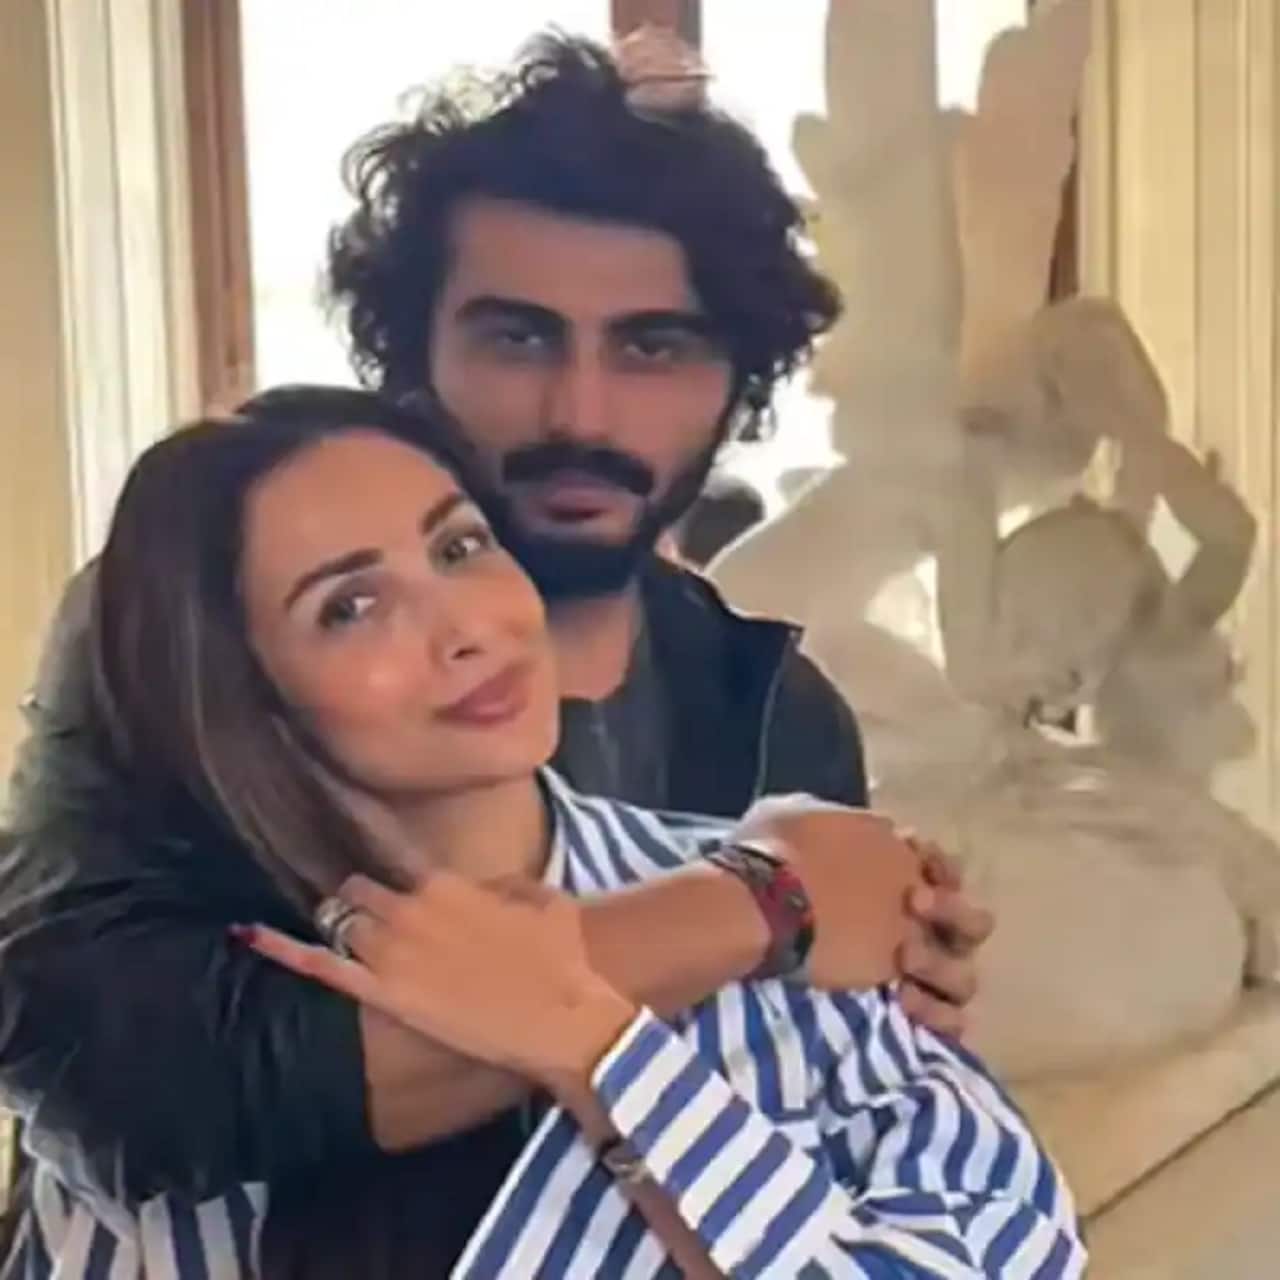 Malaika Arora is pregnant with Arjun Kapoor's child news spread like wildfire on the interne